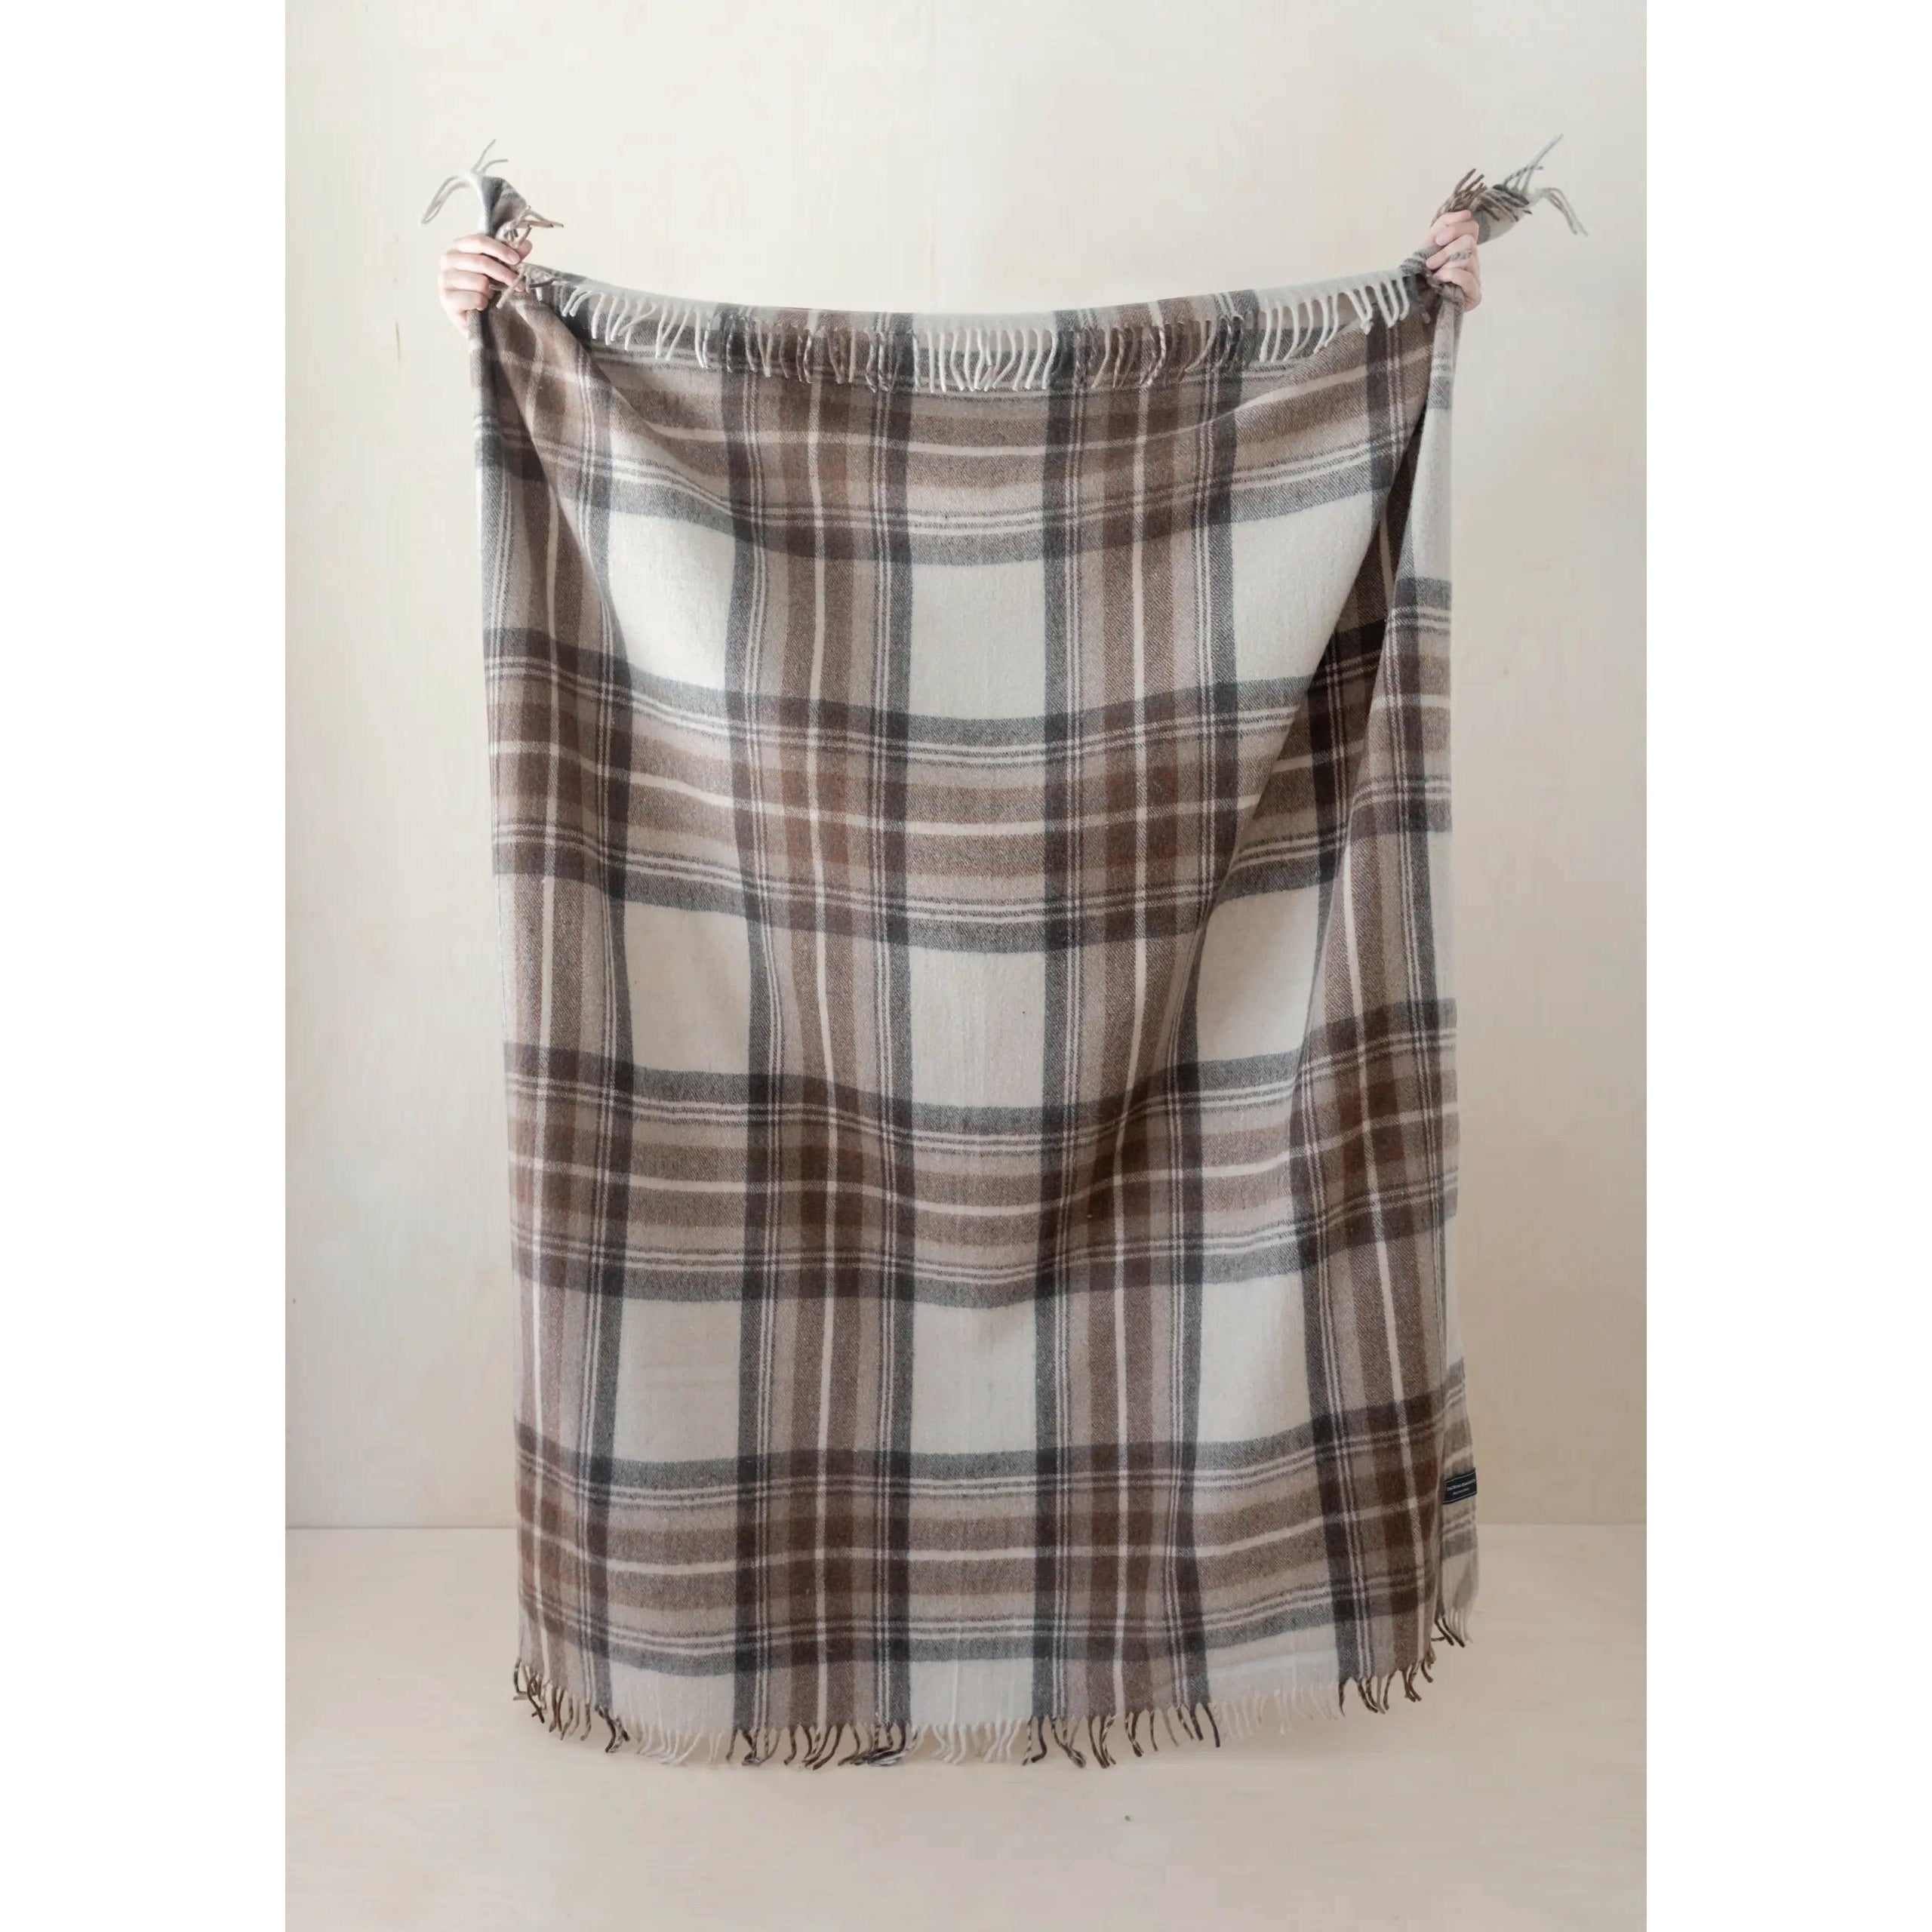 Brown Plaid Blanket made from recycled wool and recycled fibres. Eco-friendly wool blanket that is machine washable. Tartan Blanket Co. Neutral Plaid Blanket. Stewart Natural Dress Tartan